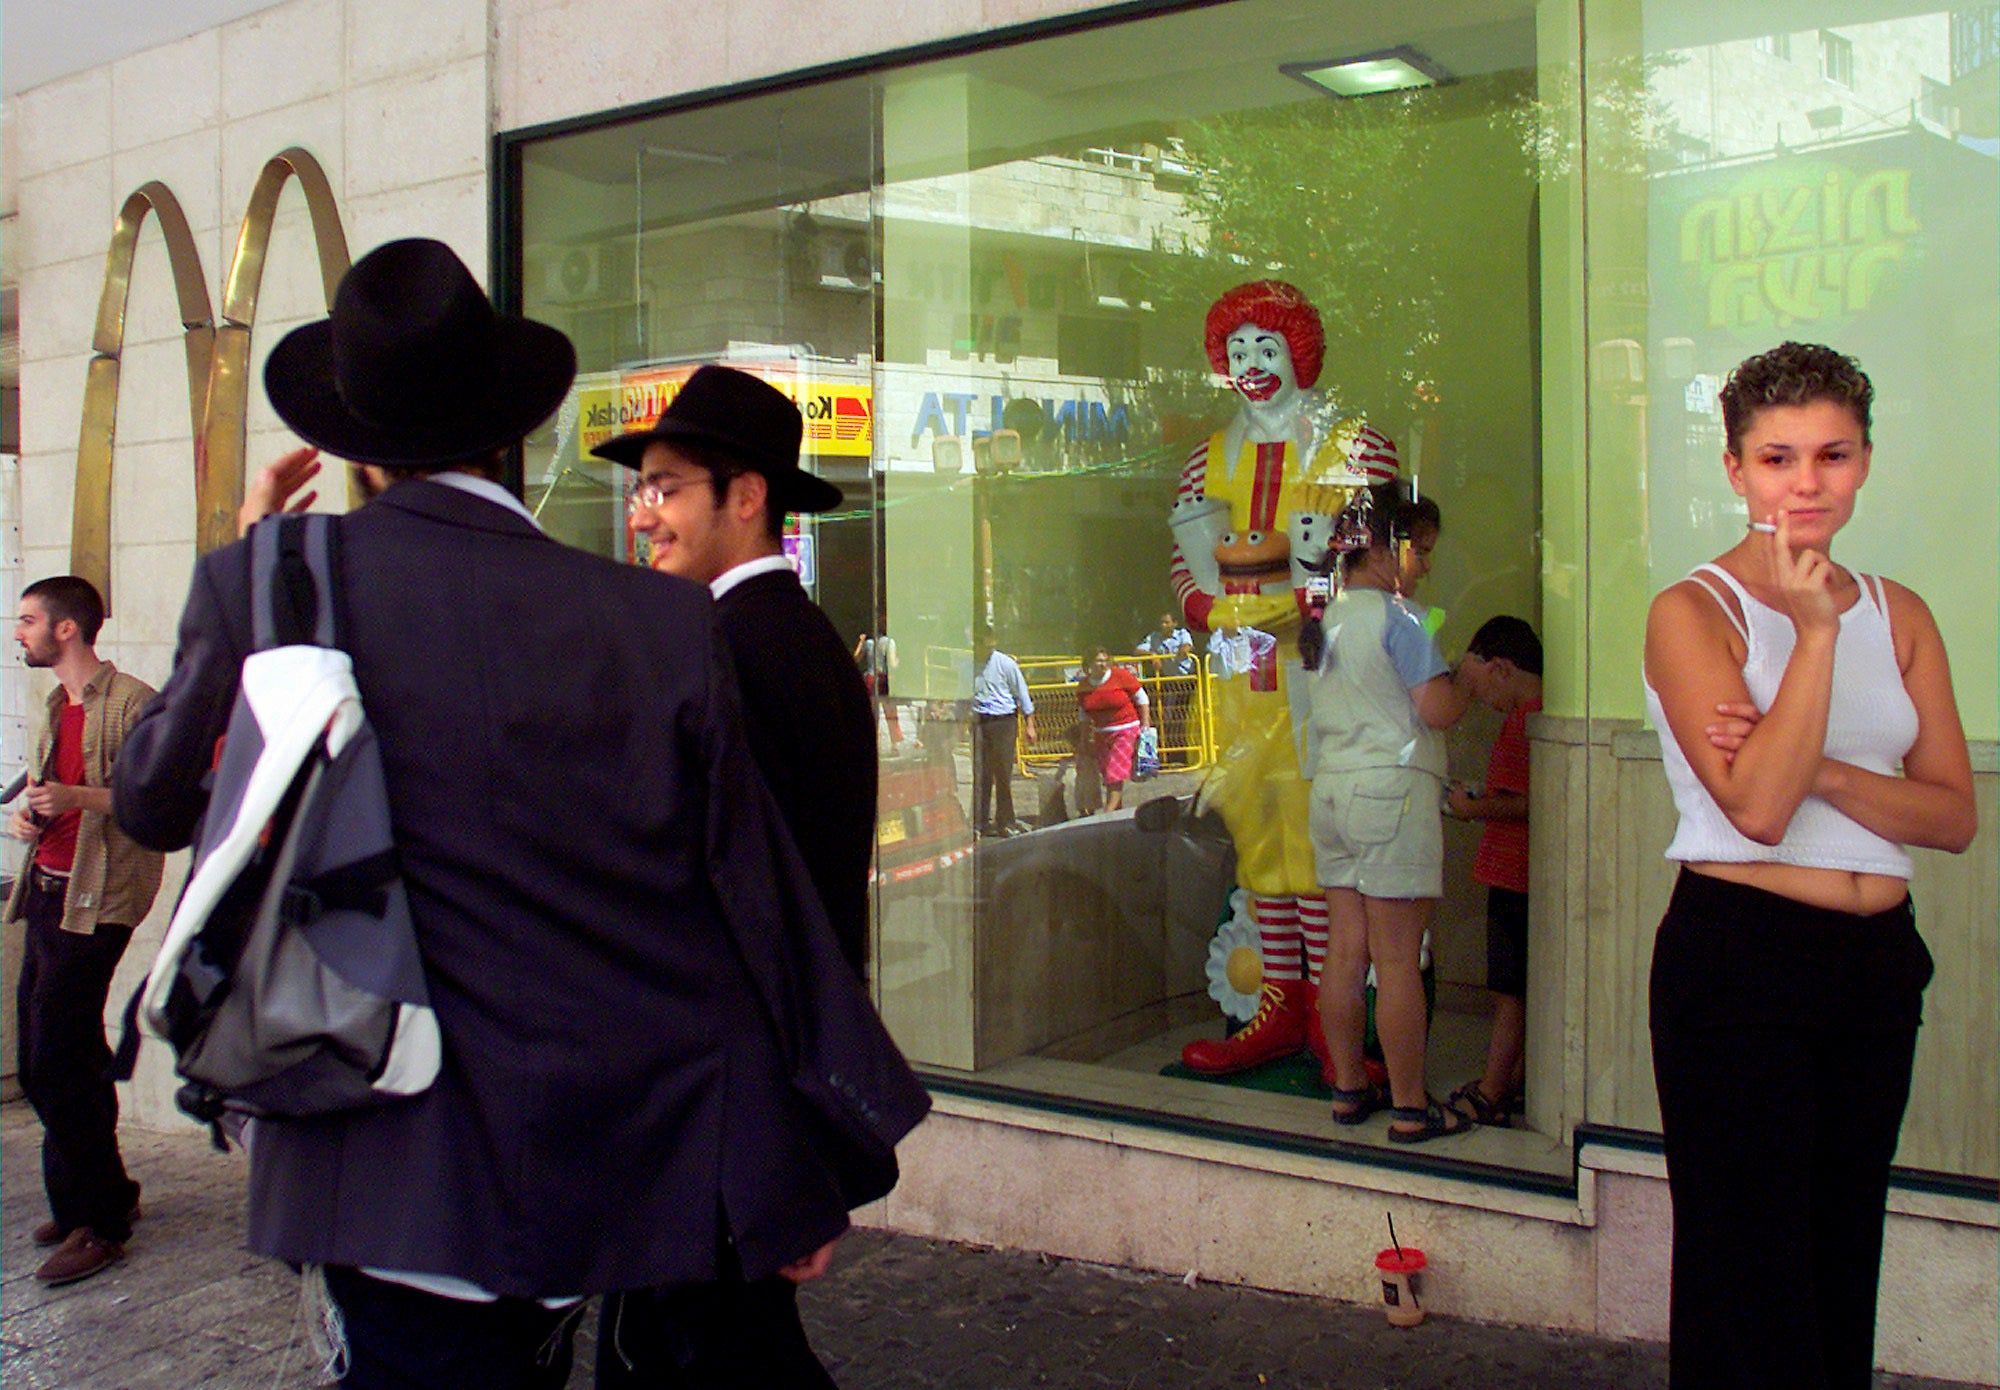 Residents of Jerusalem mingle inside and outside of the city's downtown McDonald's fast food restaurant Friday August. 16, 2002. McDonald’s is buying its restaurants in Israel from a longtime franchisee, hoping to reset sales that have slumped due to boycotts in the region